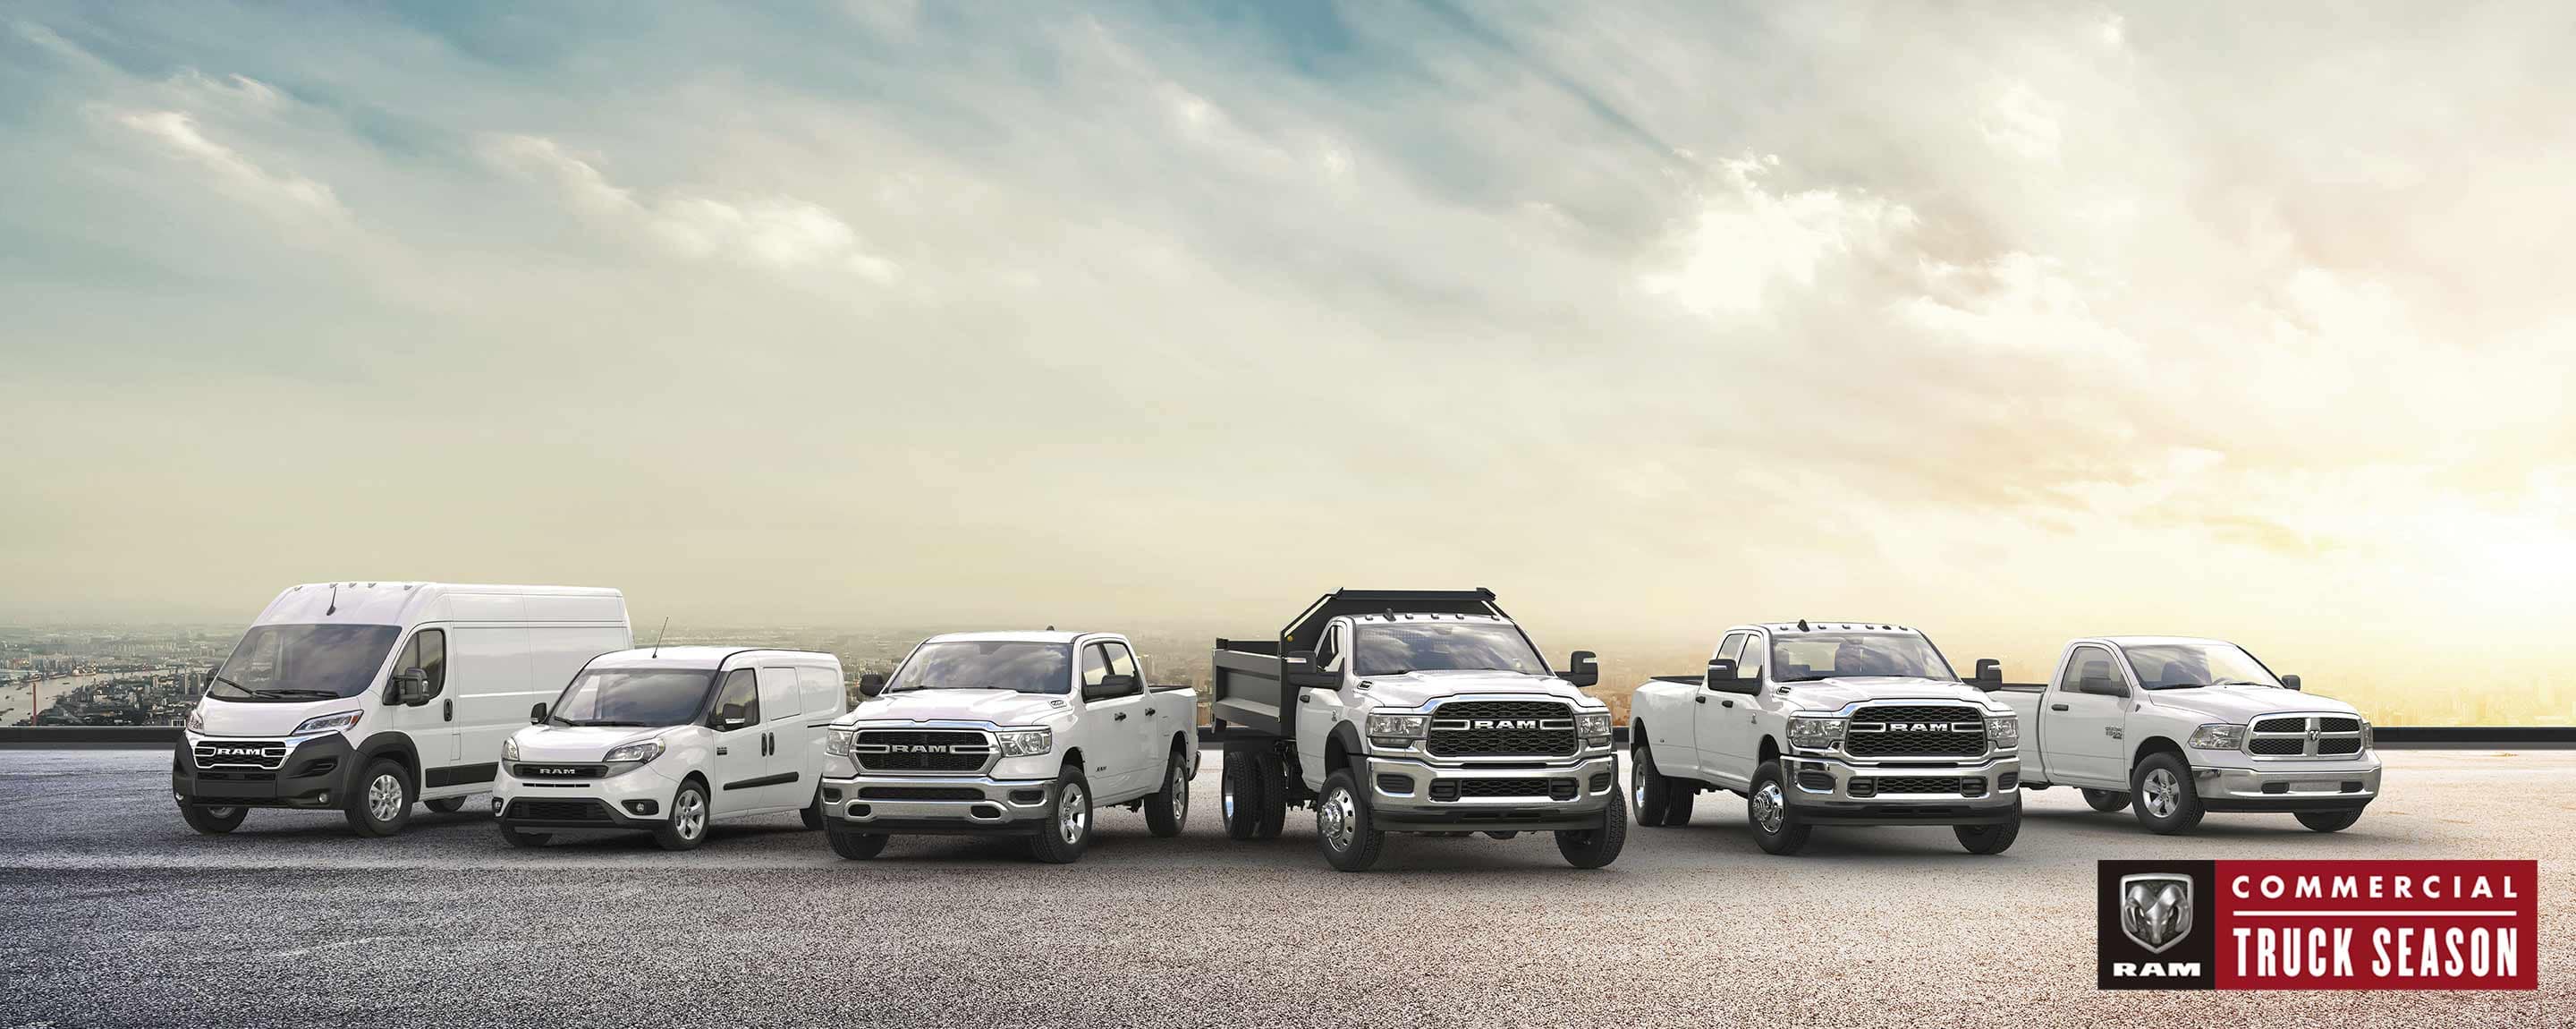 The Ram Brand lineup, all in white, parked side-by-side. Beginning on the left: a 2023 Ram ProMaster 3500 High Roof Cargo Van, 2022 Ram ProMaster City Cargo Van, 2023 Ram 1500 Tradesman Crew Cab, 2023 Ram 5500 Tradesman Regular Cab with dump body, 2023 Ram 3500 Tradesman Crew Cab and 2023 Ram 1500 Classic Regular Cab. Ram Commercial Truck Season.